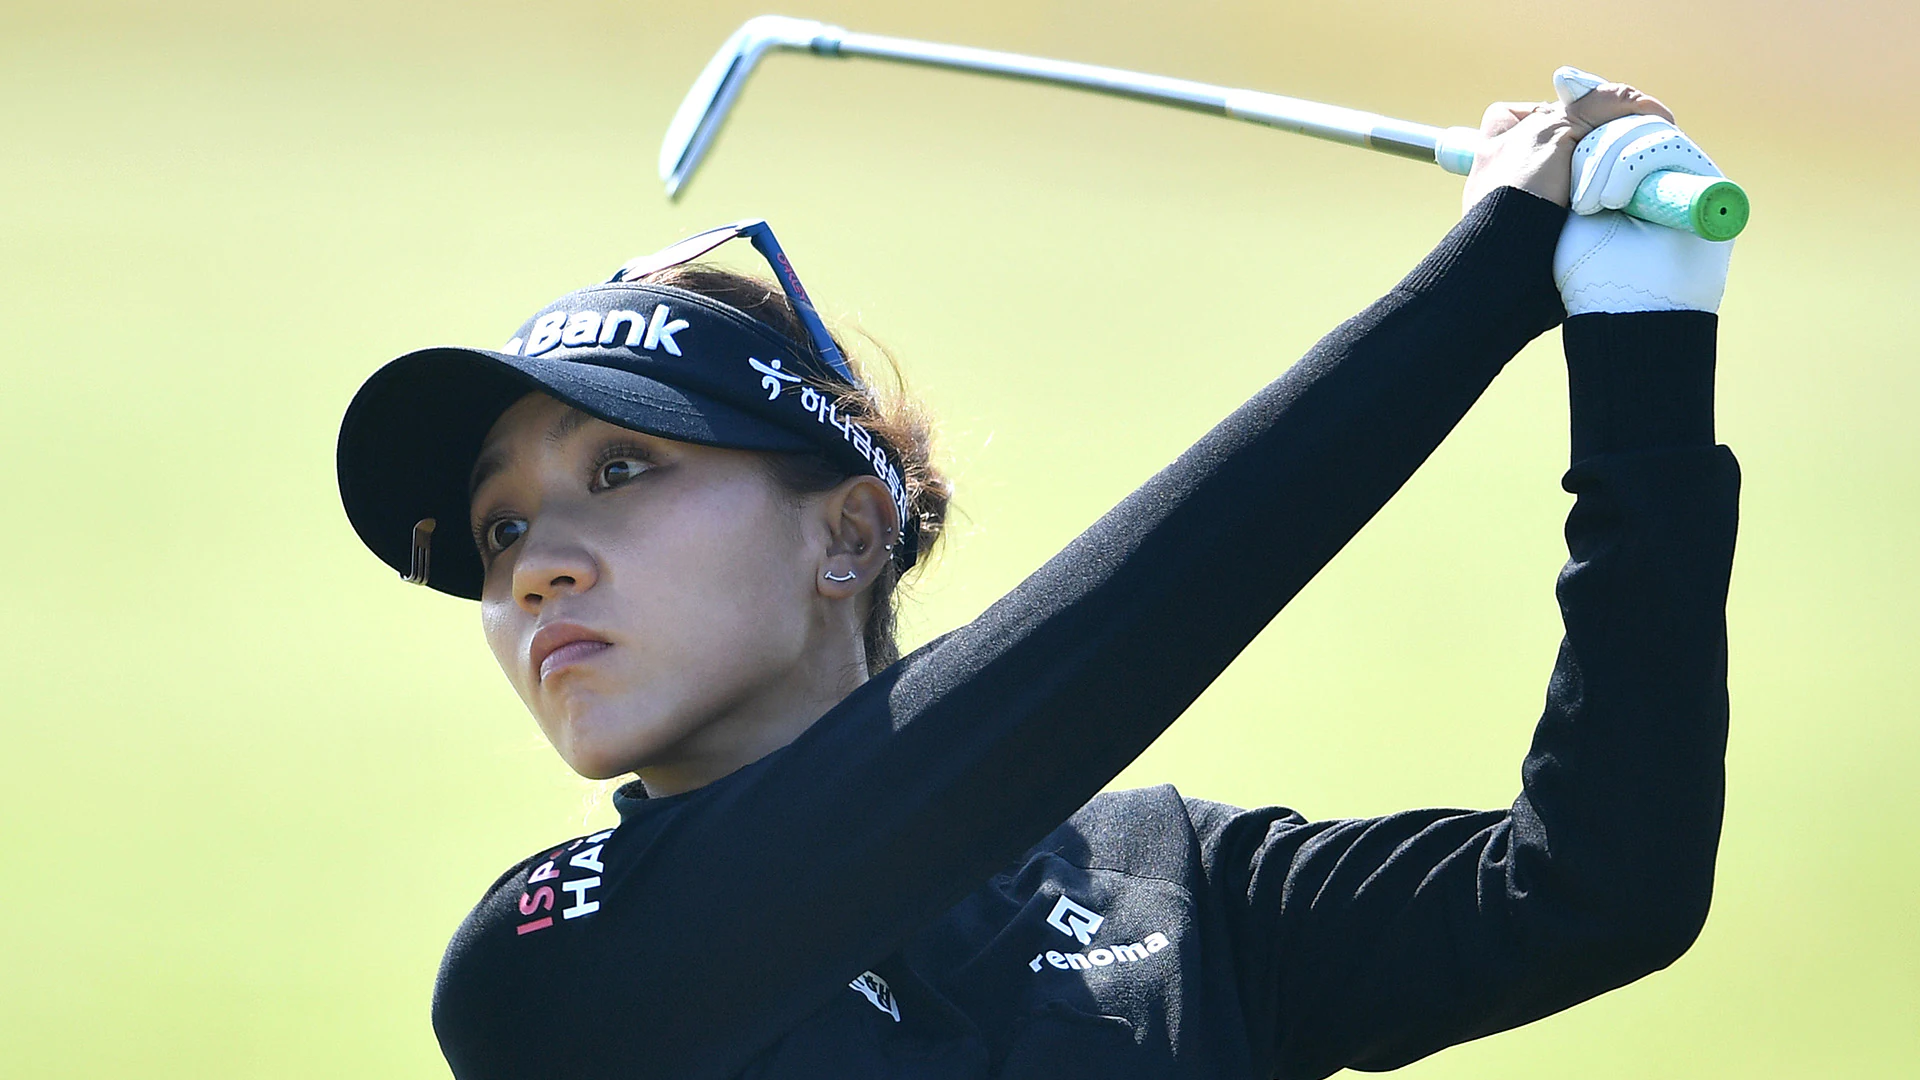 Lydia Ko shoots another 65, leads by 2 at Women’s Scottish Open